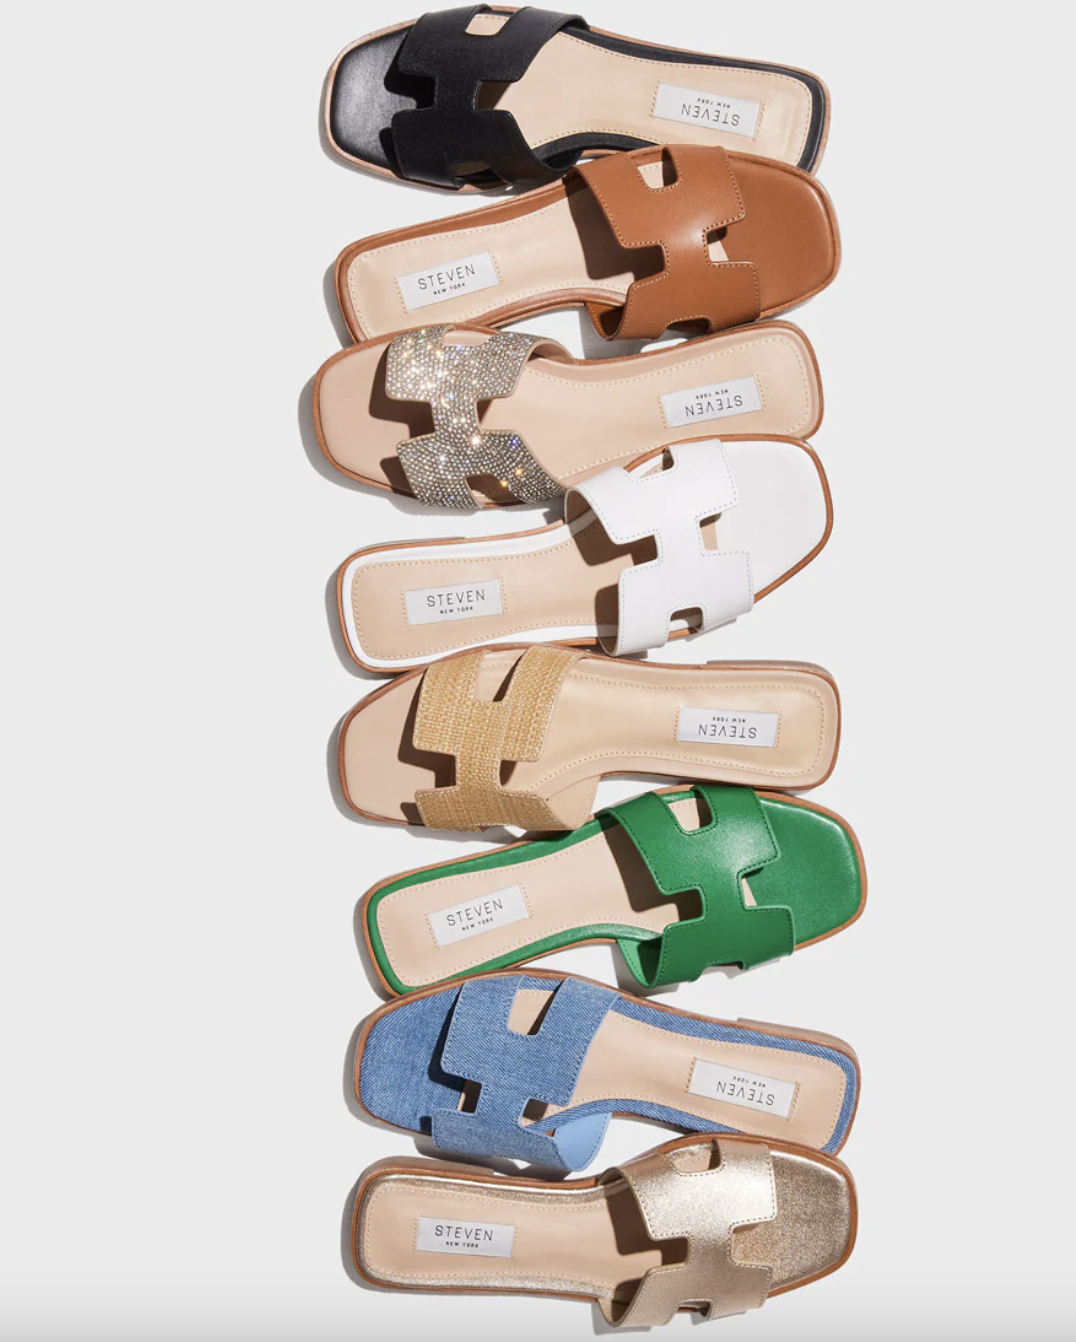 the sandals in black, tan, silver, white, beige, green, denim, and gold